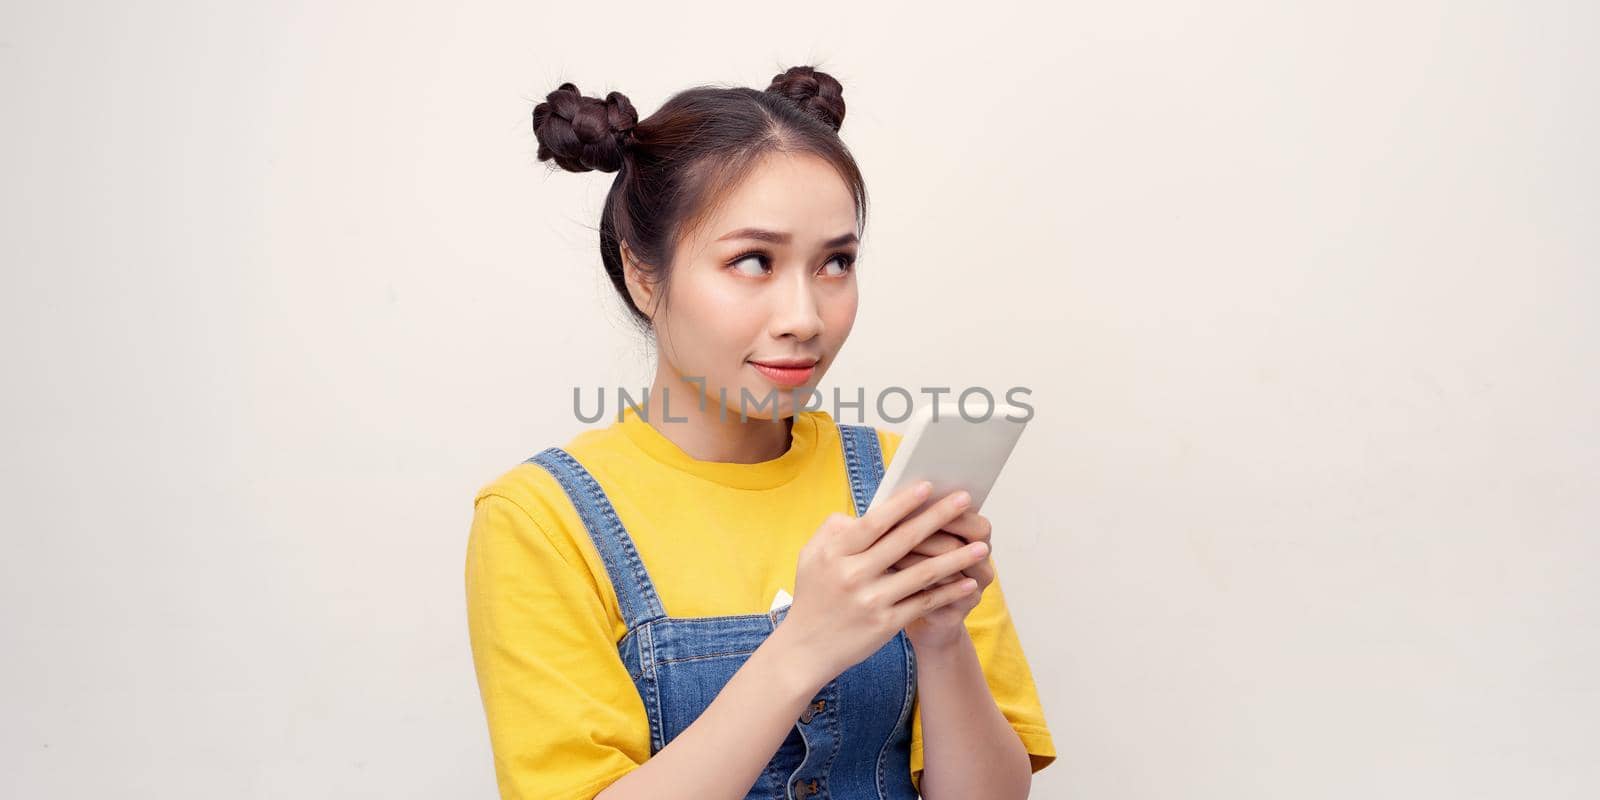 Excited beautiful woman receiving SMS in mobile phone over plain background